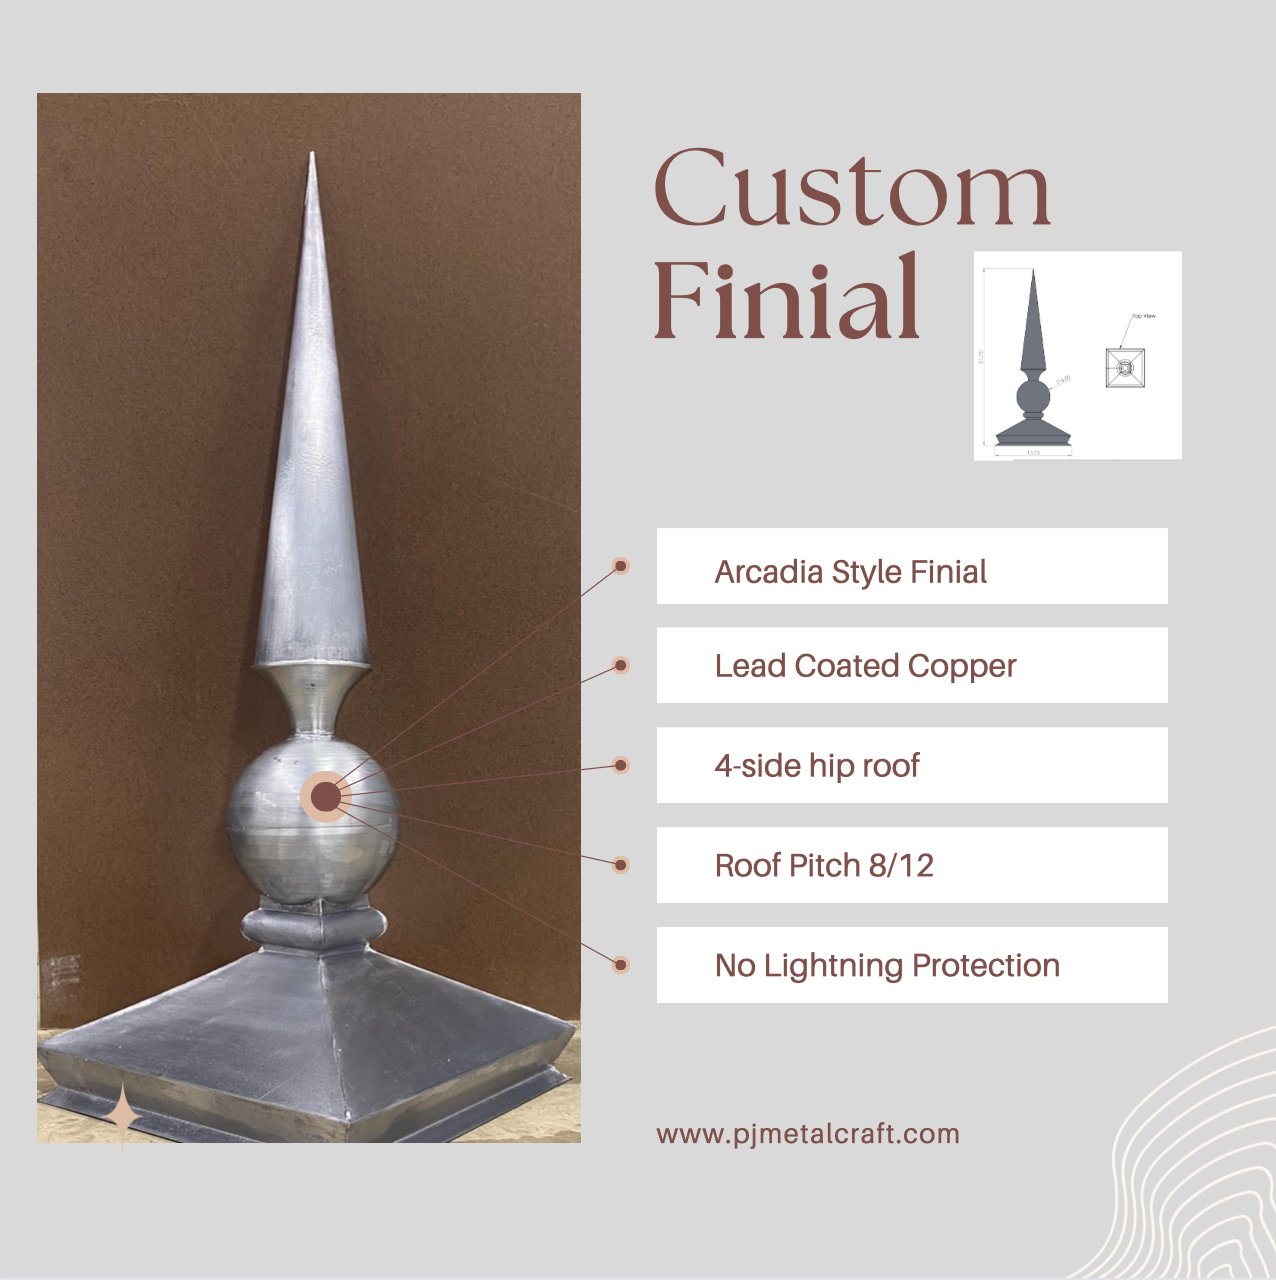 Lead Coated Copper Final